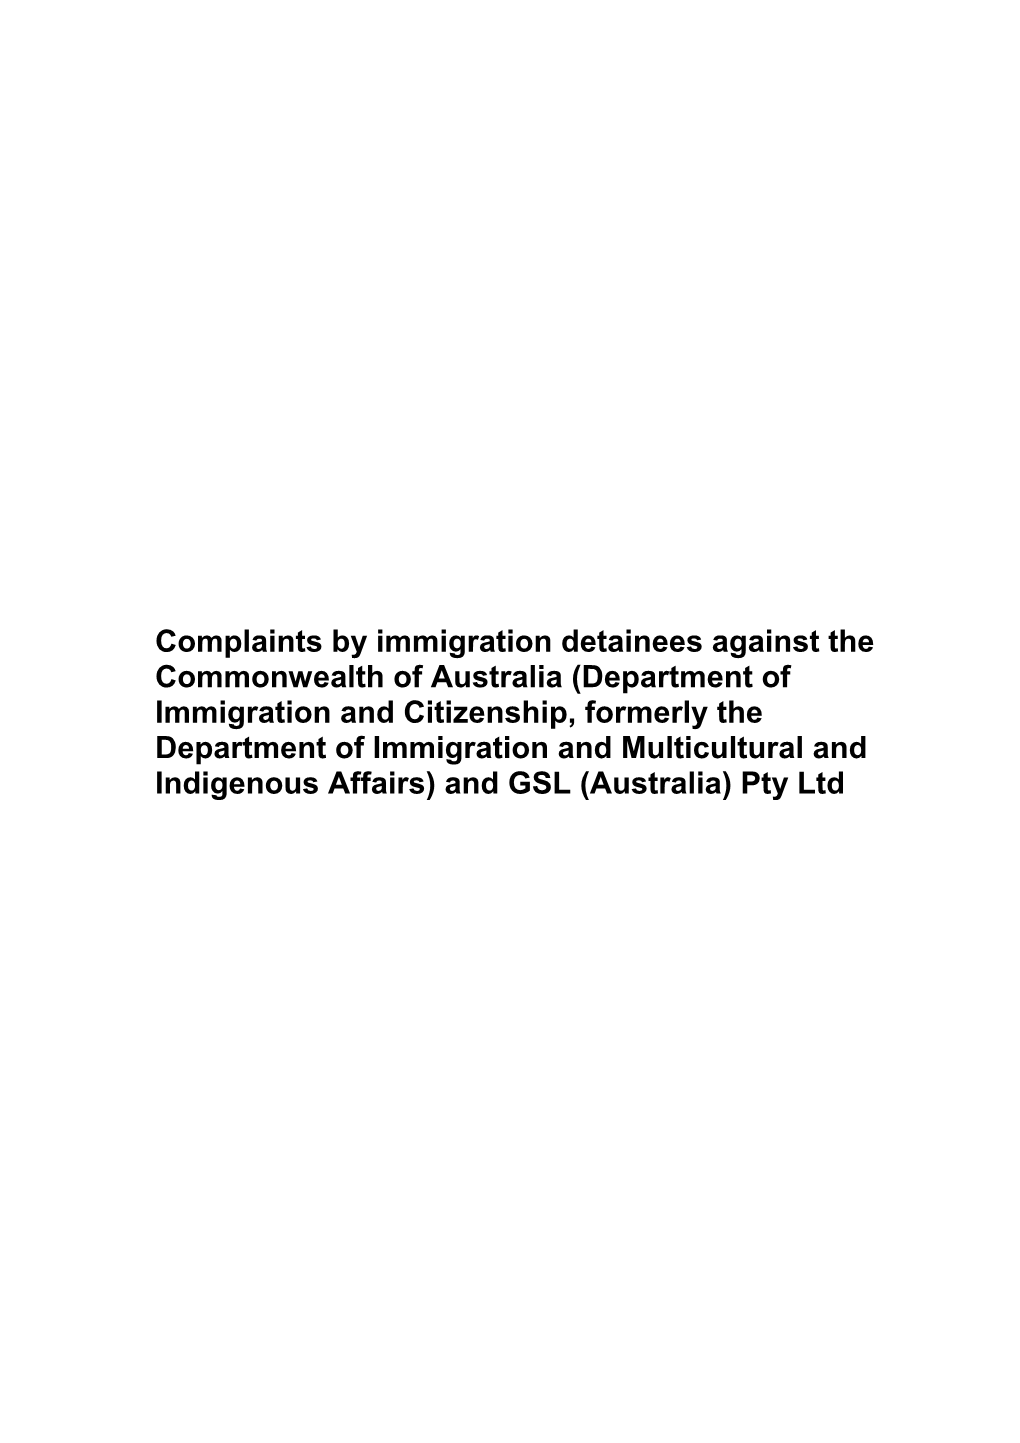 Complaints by Immigration Detainees Against the Commonwealth of Australia (Department